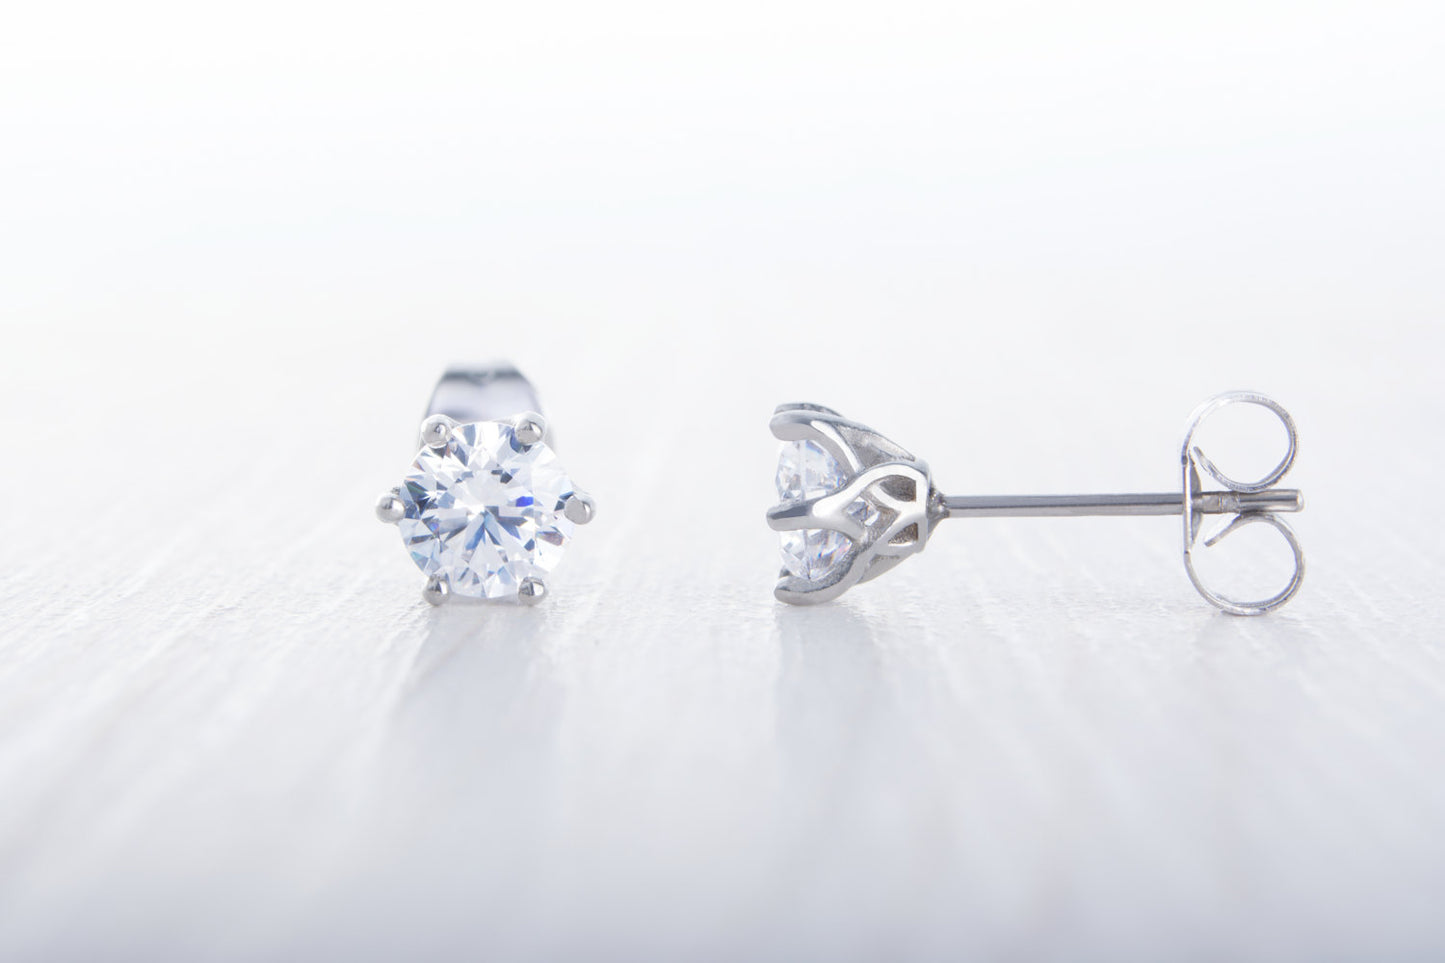 Man Made Diamond Simulant stud earrings, available in titanium, white gold and surgical steel 4mm, 5mm or 6mm sizes